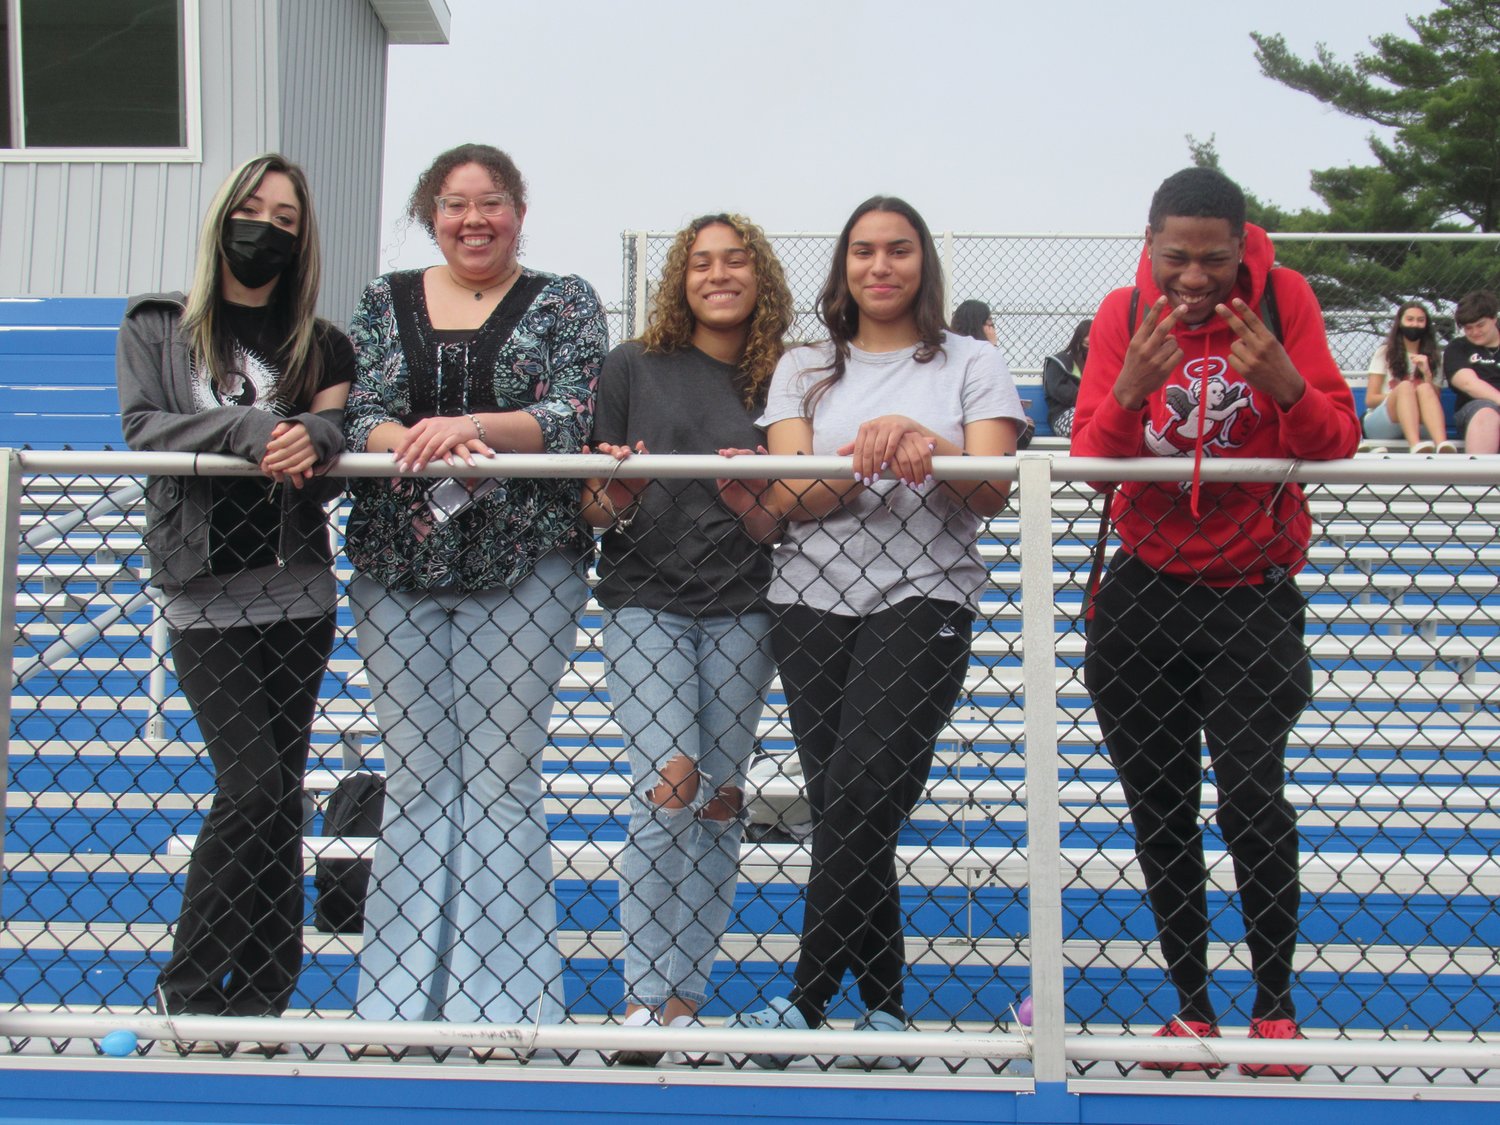 WATCHING THE HUNT: Isabella Ribezzo, Glorianna Crichlow, Jennell Fernandez, Gezzelie Fernandez and Xavier Thomas were among the JHS students who paid $1 to sit in the bleachers to watch last week’s Easter Hunt.